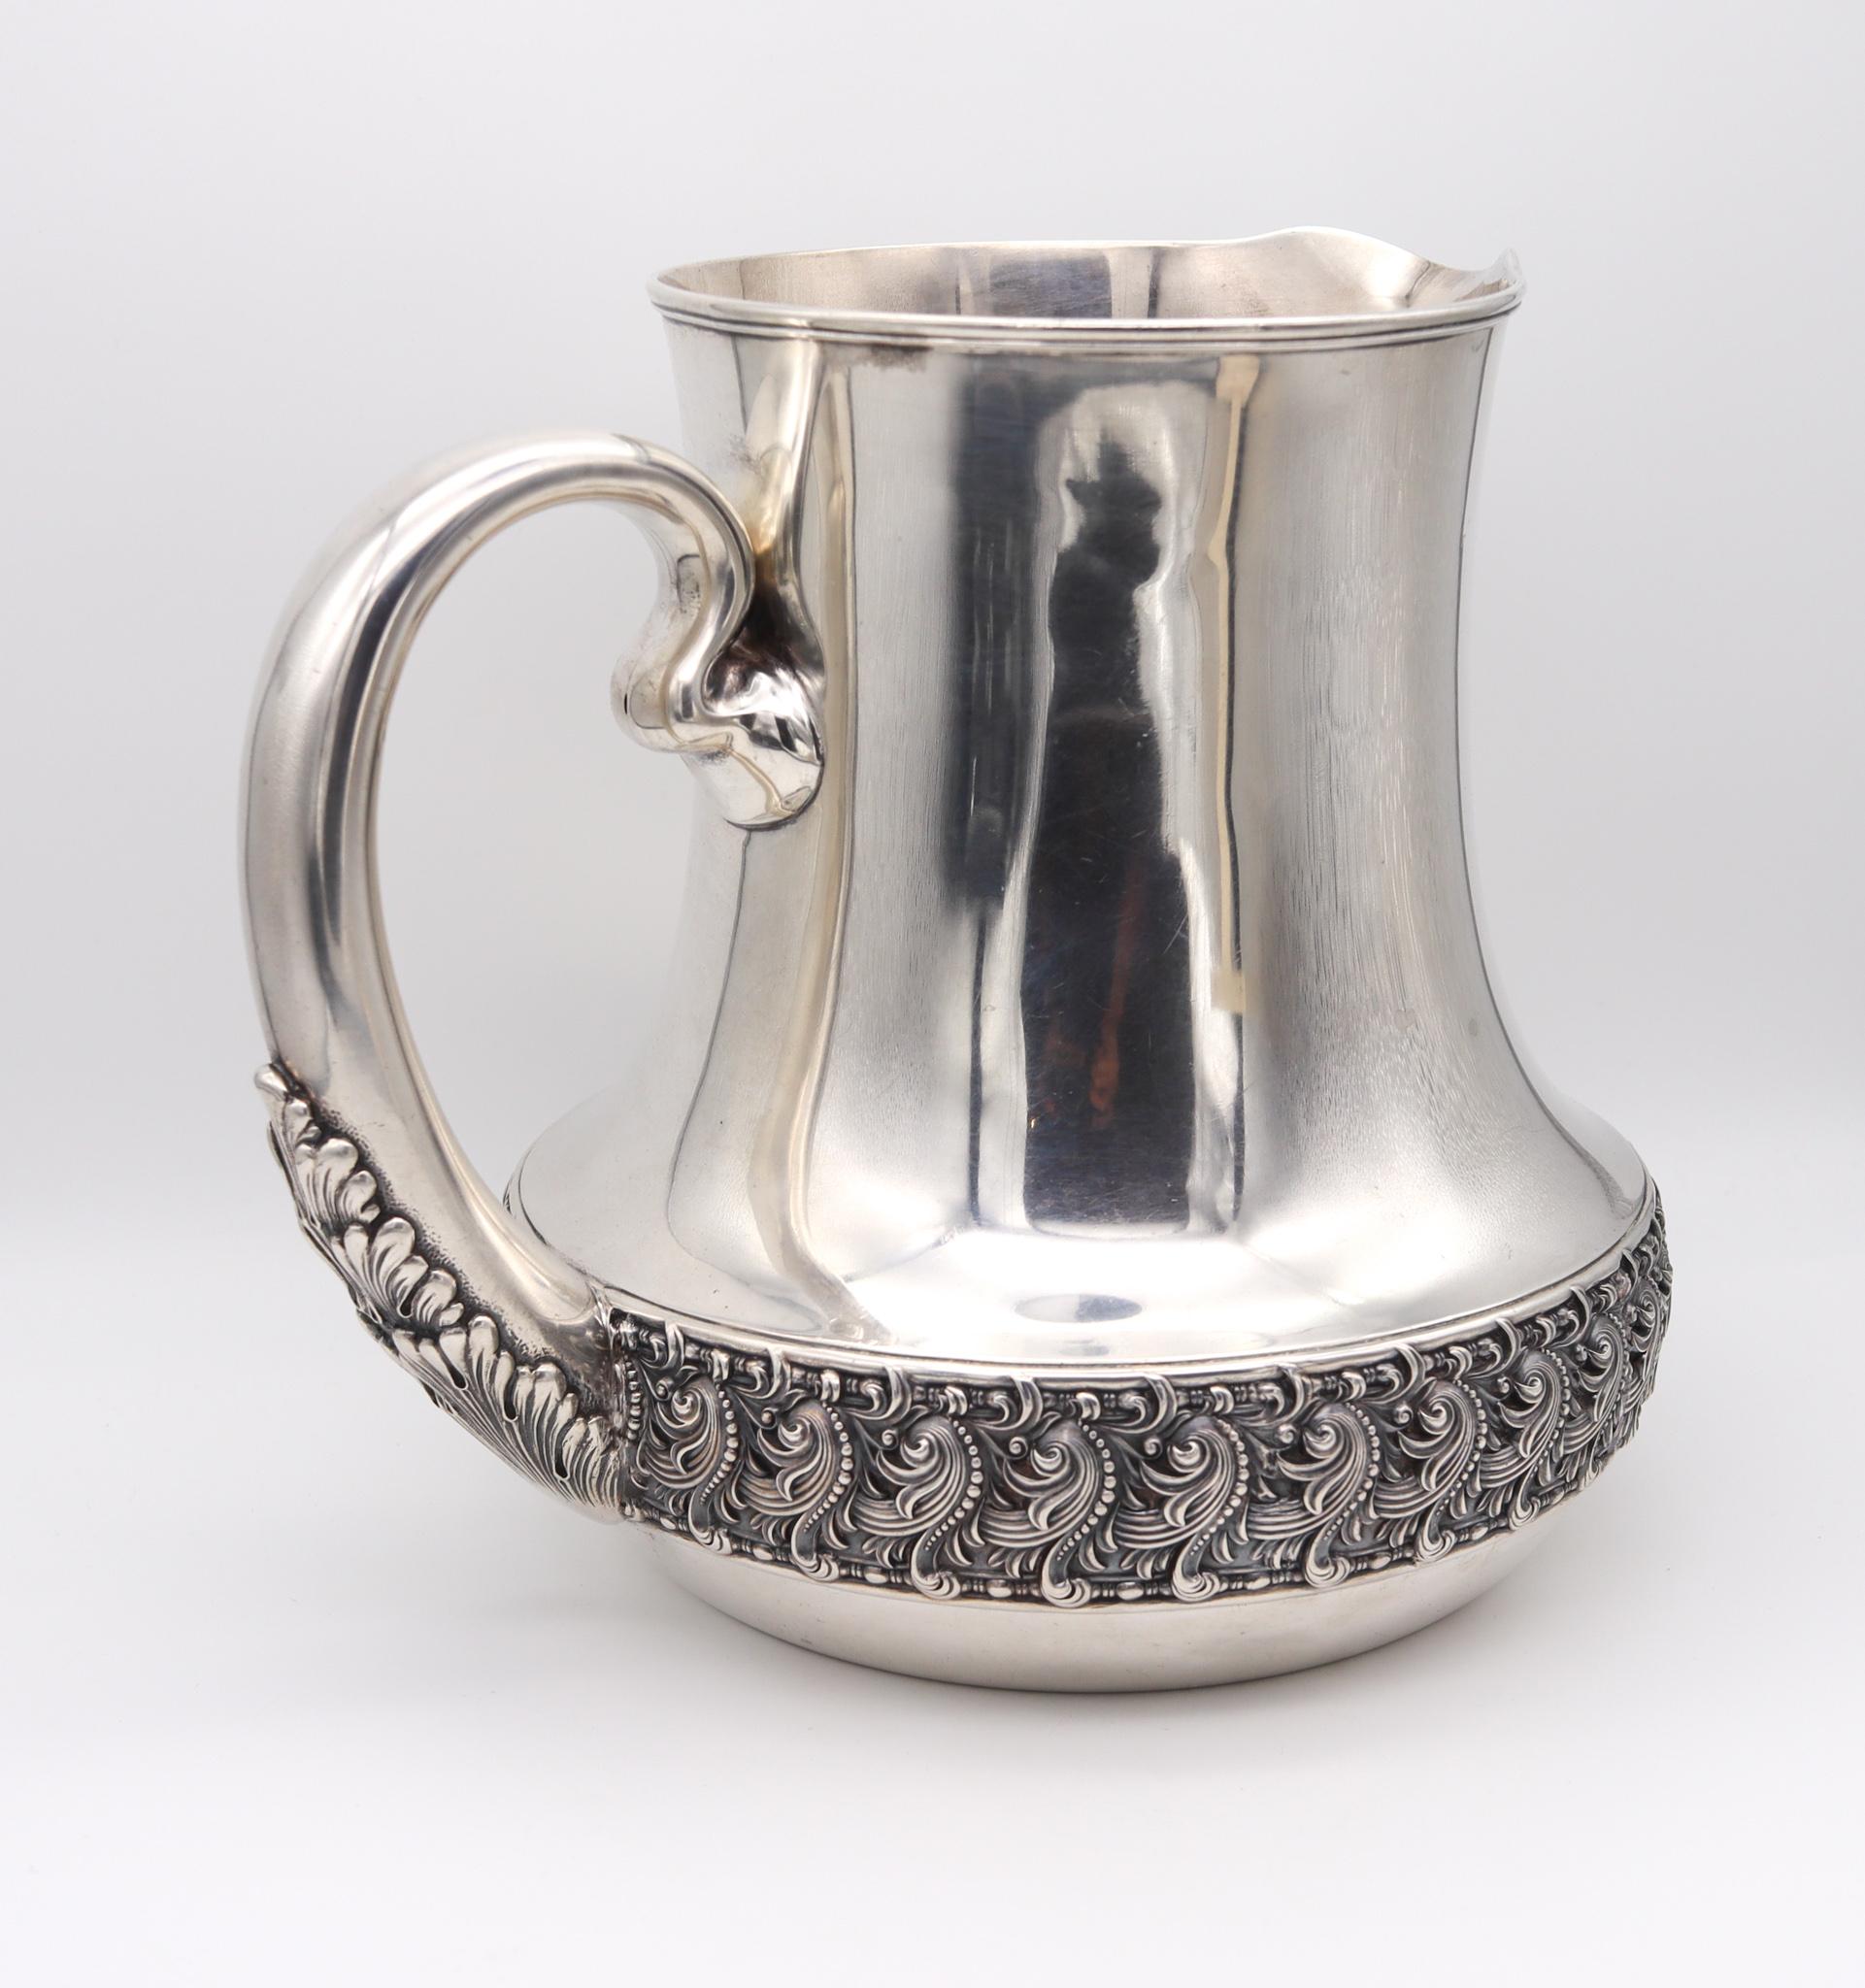 Tiffany & Co 1891 Charles L Tiffany Art Nouveau Water Pitcher in 925 Sterling  4